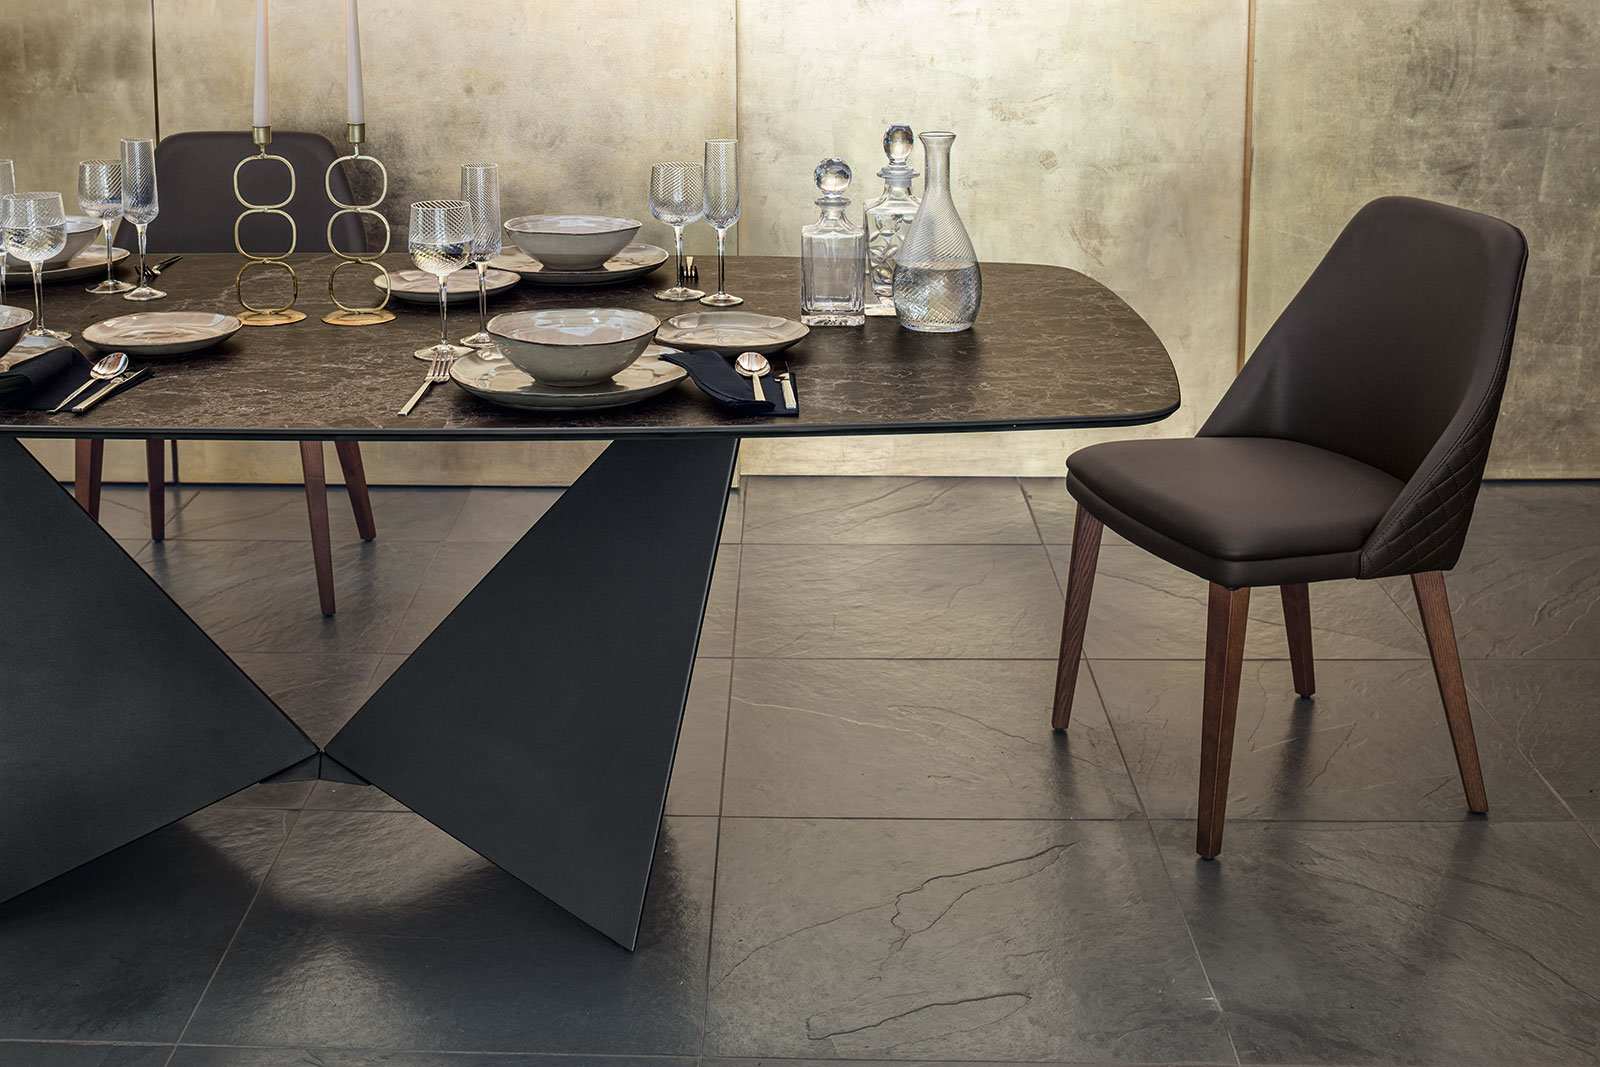 Majestic ceramic dining table, sculptural and elegant. Made in Italy with the best know-how and materials. Design by Riccardo Buscato. Free home delivery.